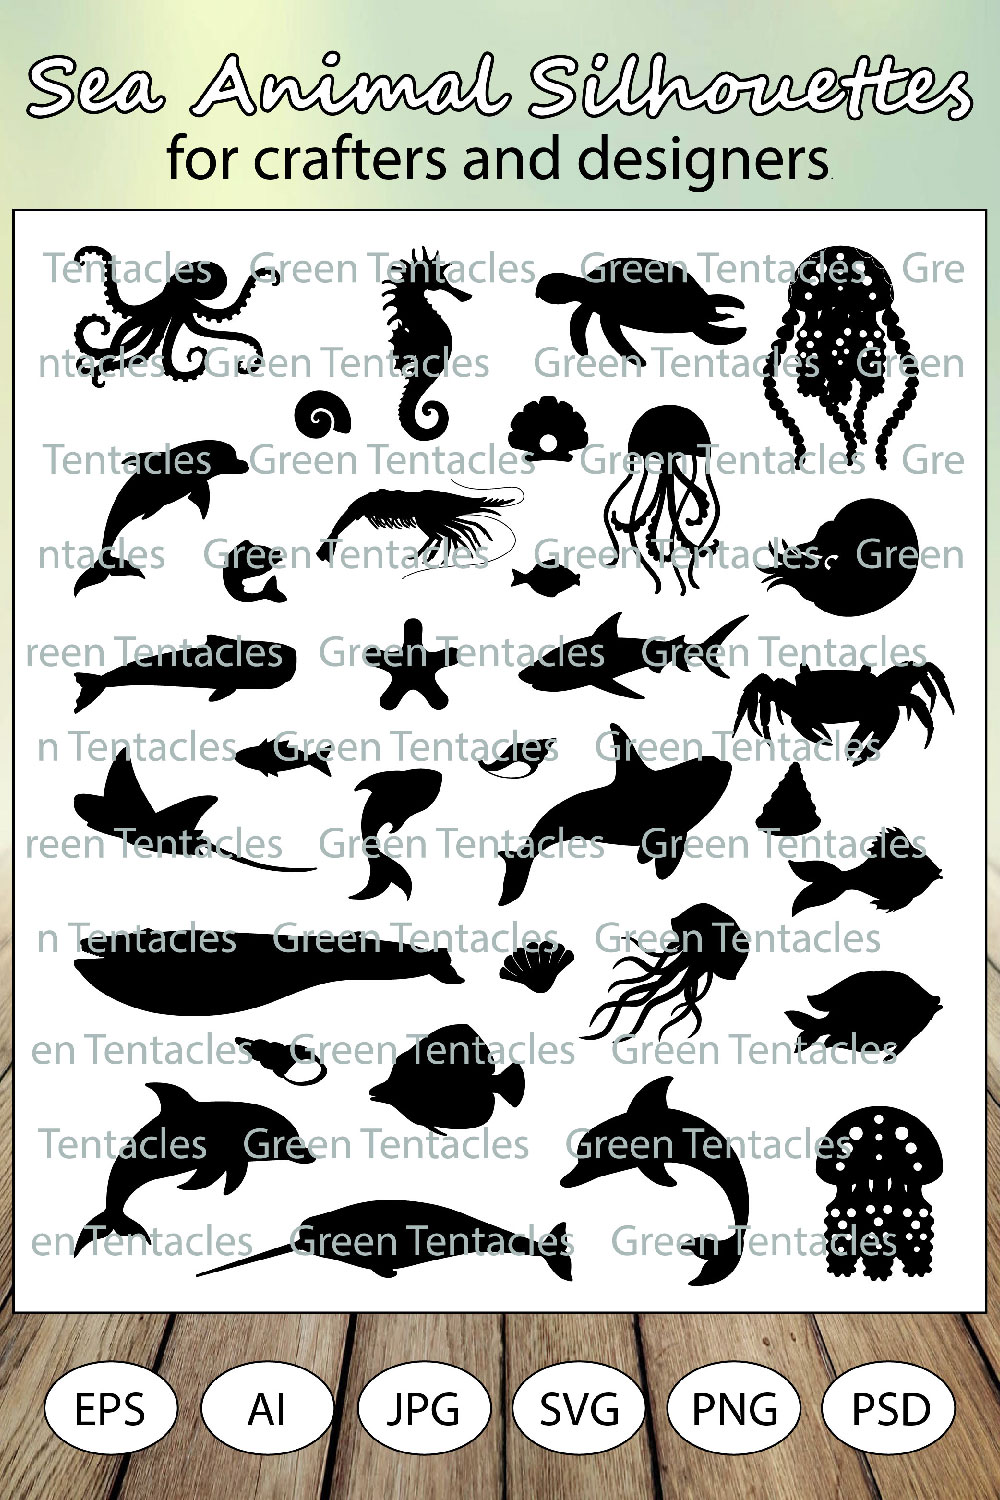 Sea Animal Silhouettes for Crafters and Designers pinterest preview image.